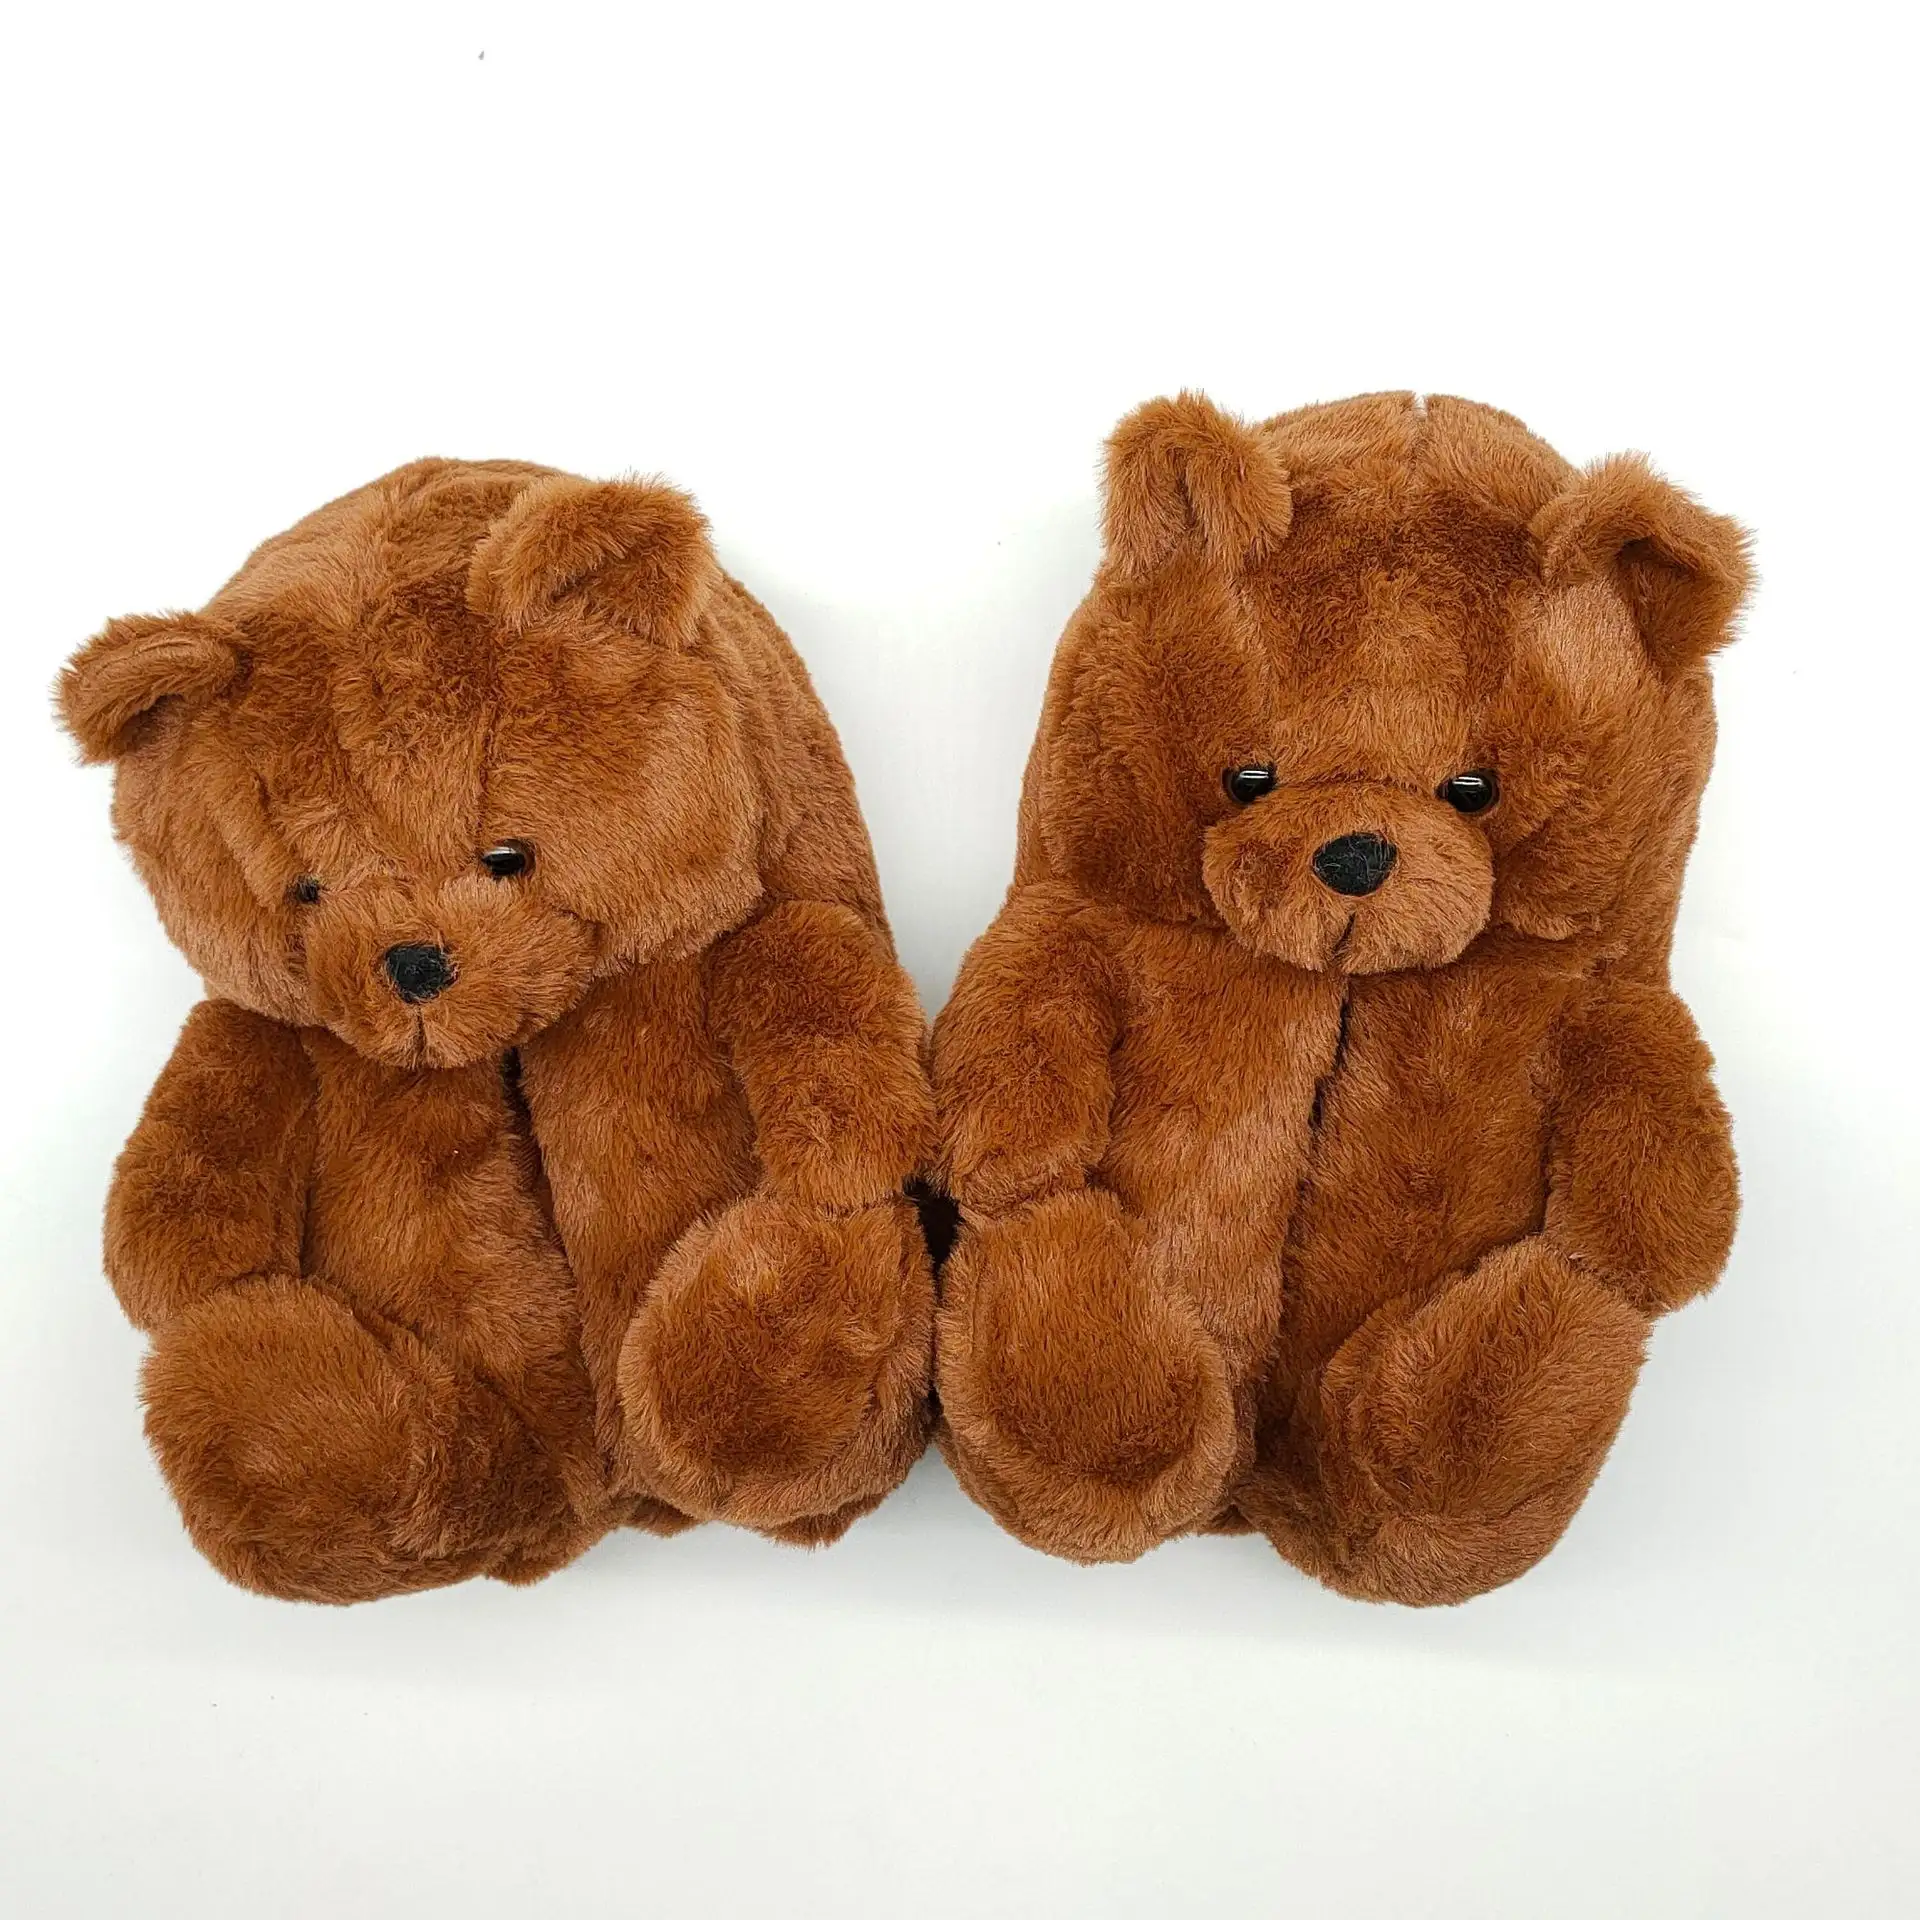 2021 New Design Teddy bear slippers arrivals fuzzy teddy Wholesale Plush New Style Slippers House Teddy Bear Slippers f